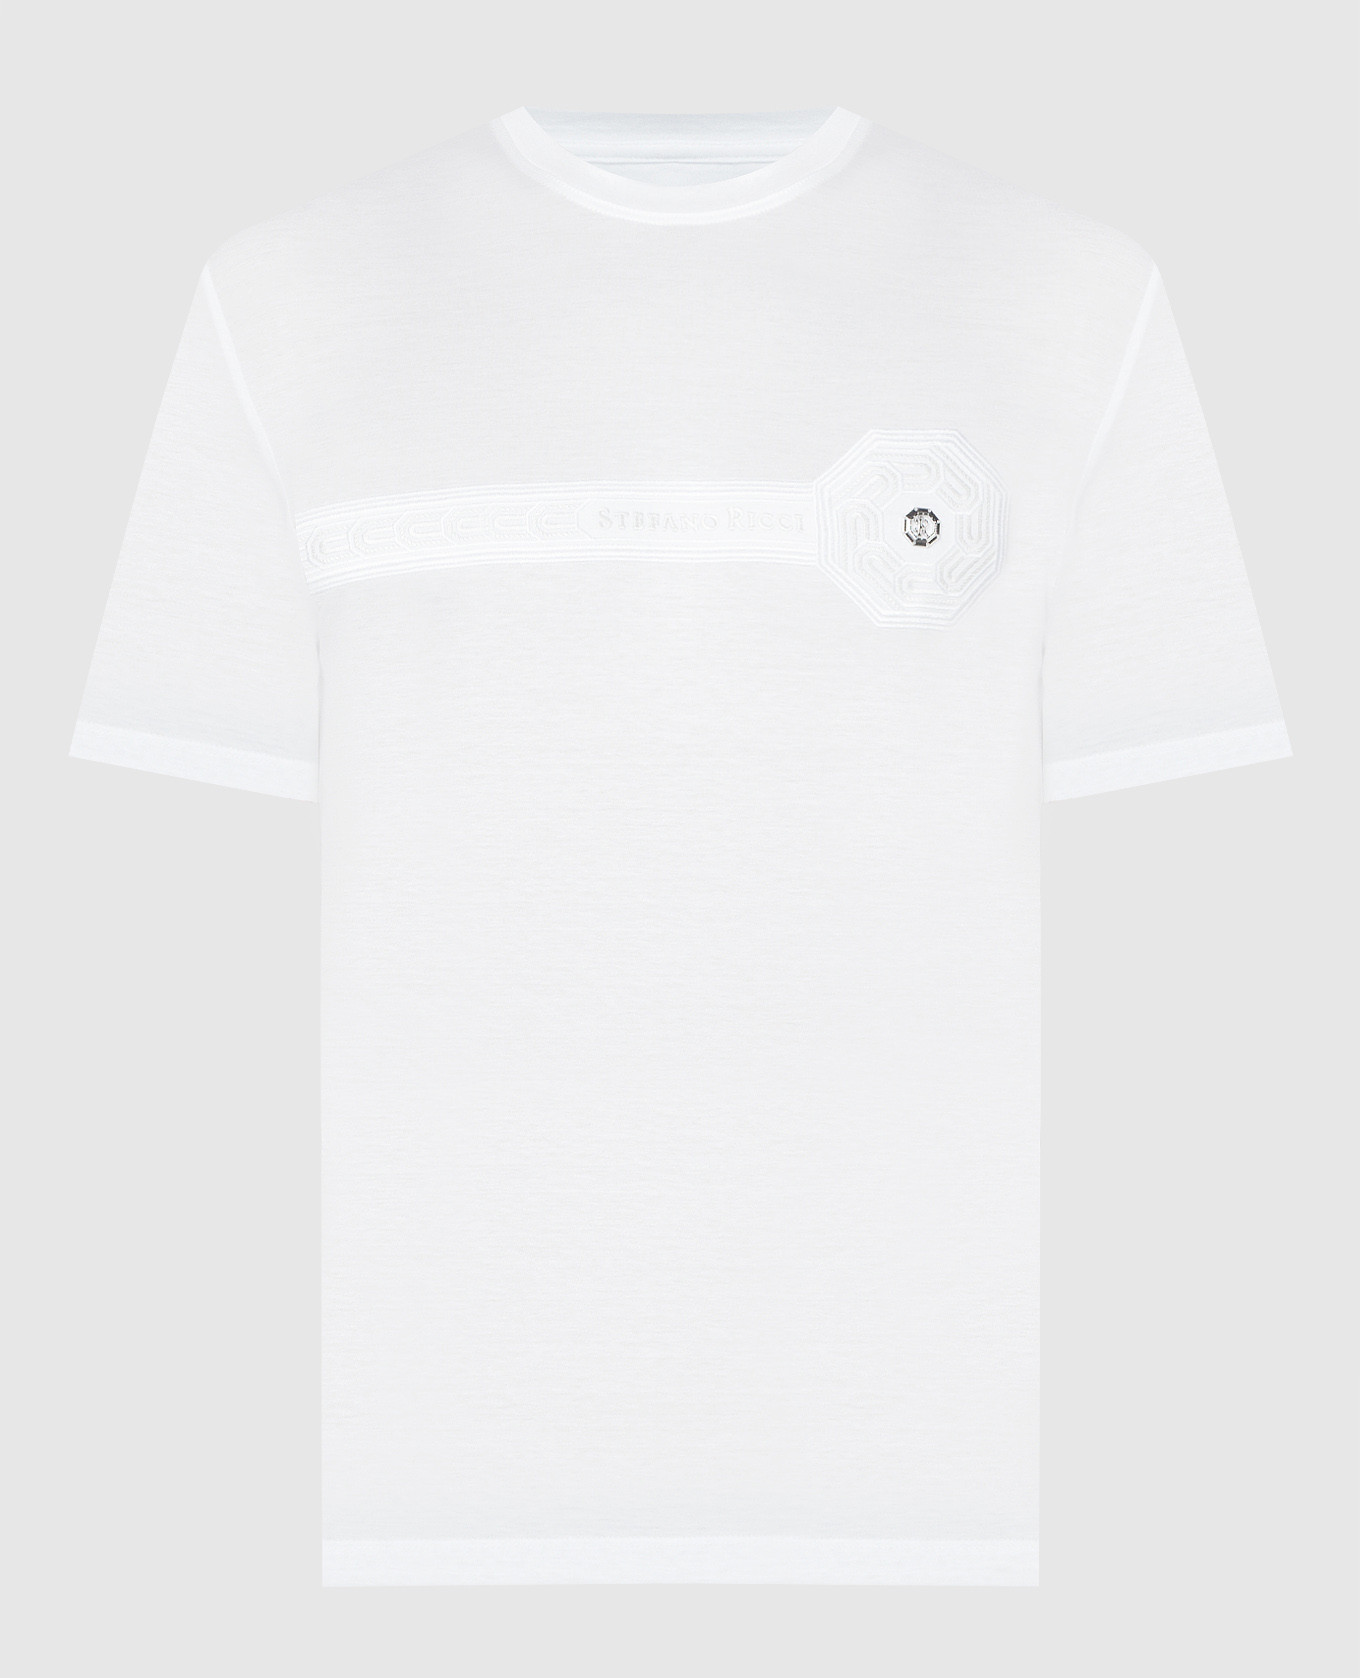 White t-shirt with embroidery and metal logo